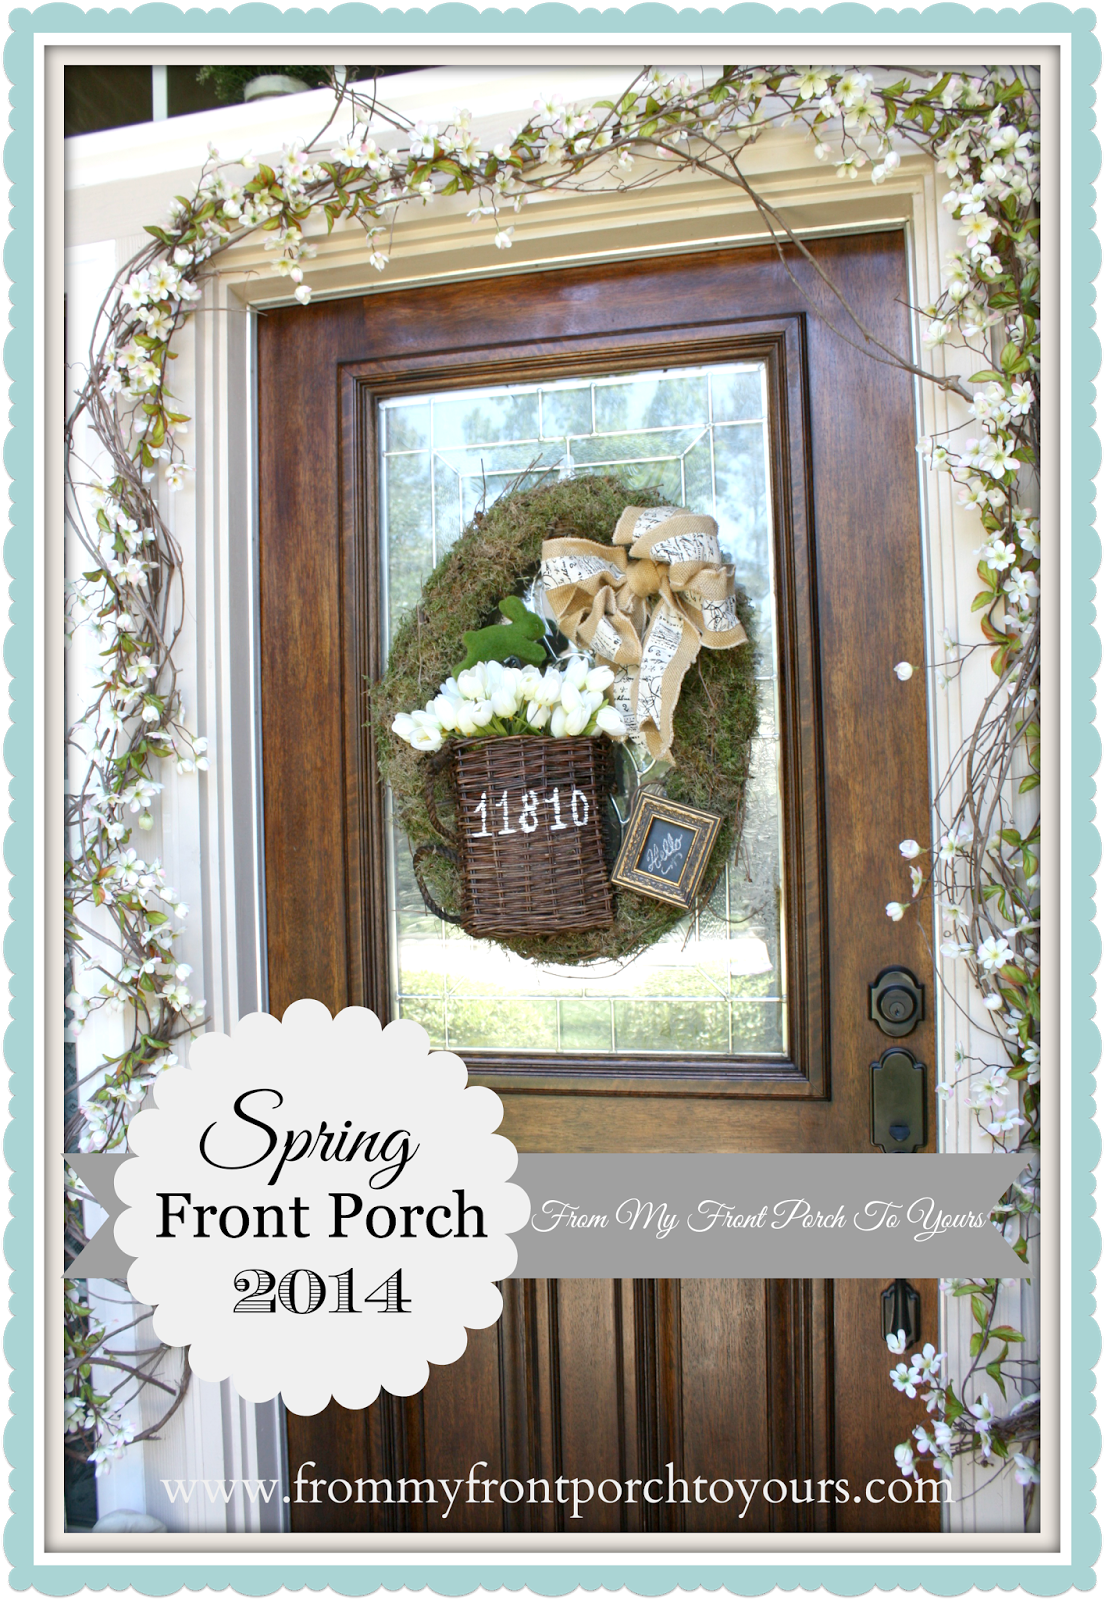 Spring Front Porch-Top Blog Posts of 2014- From My Front Porch To Yours